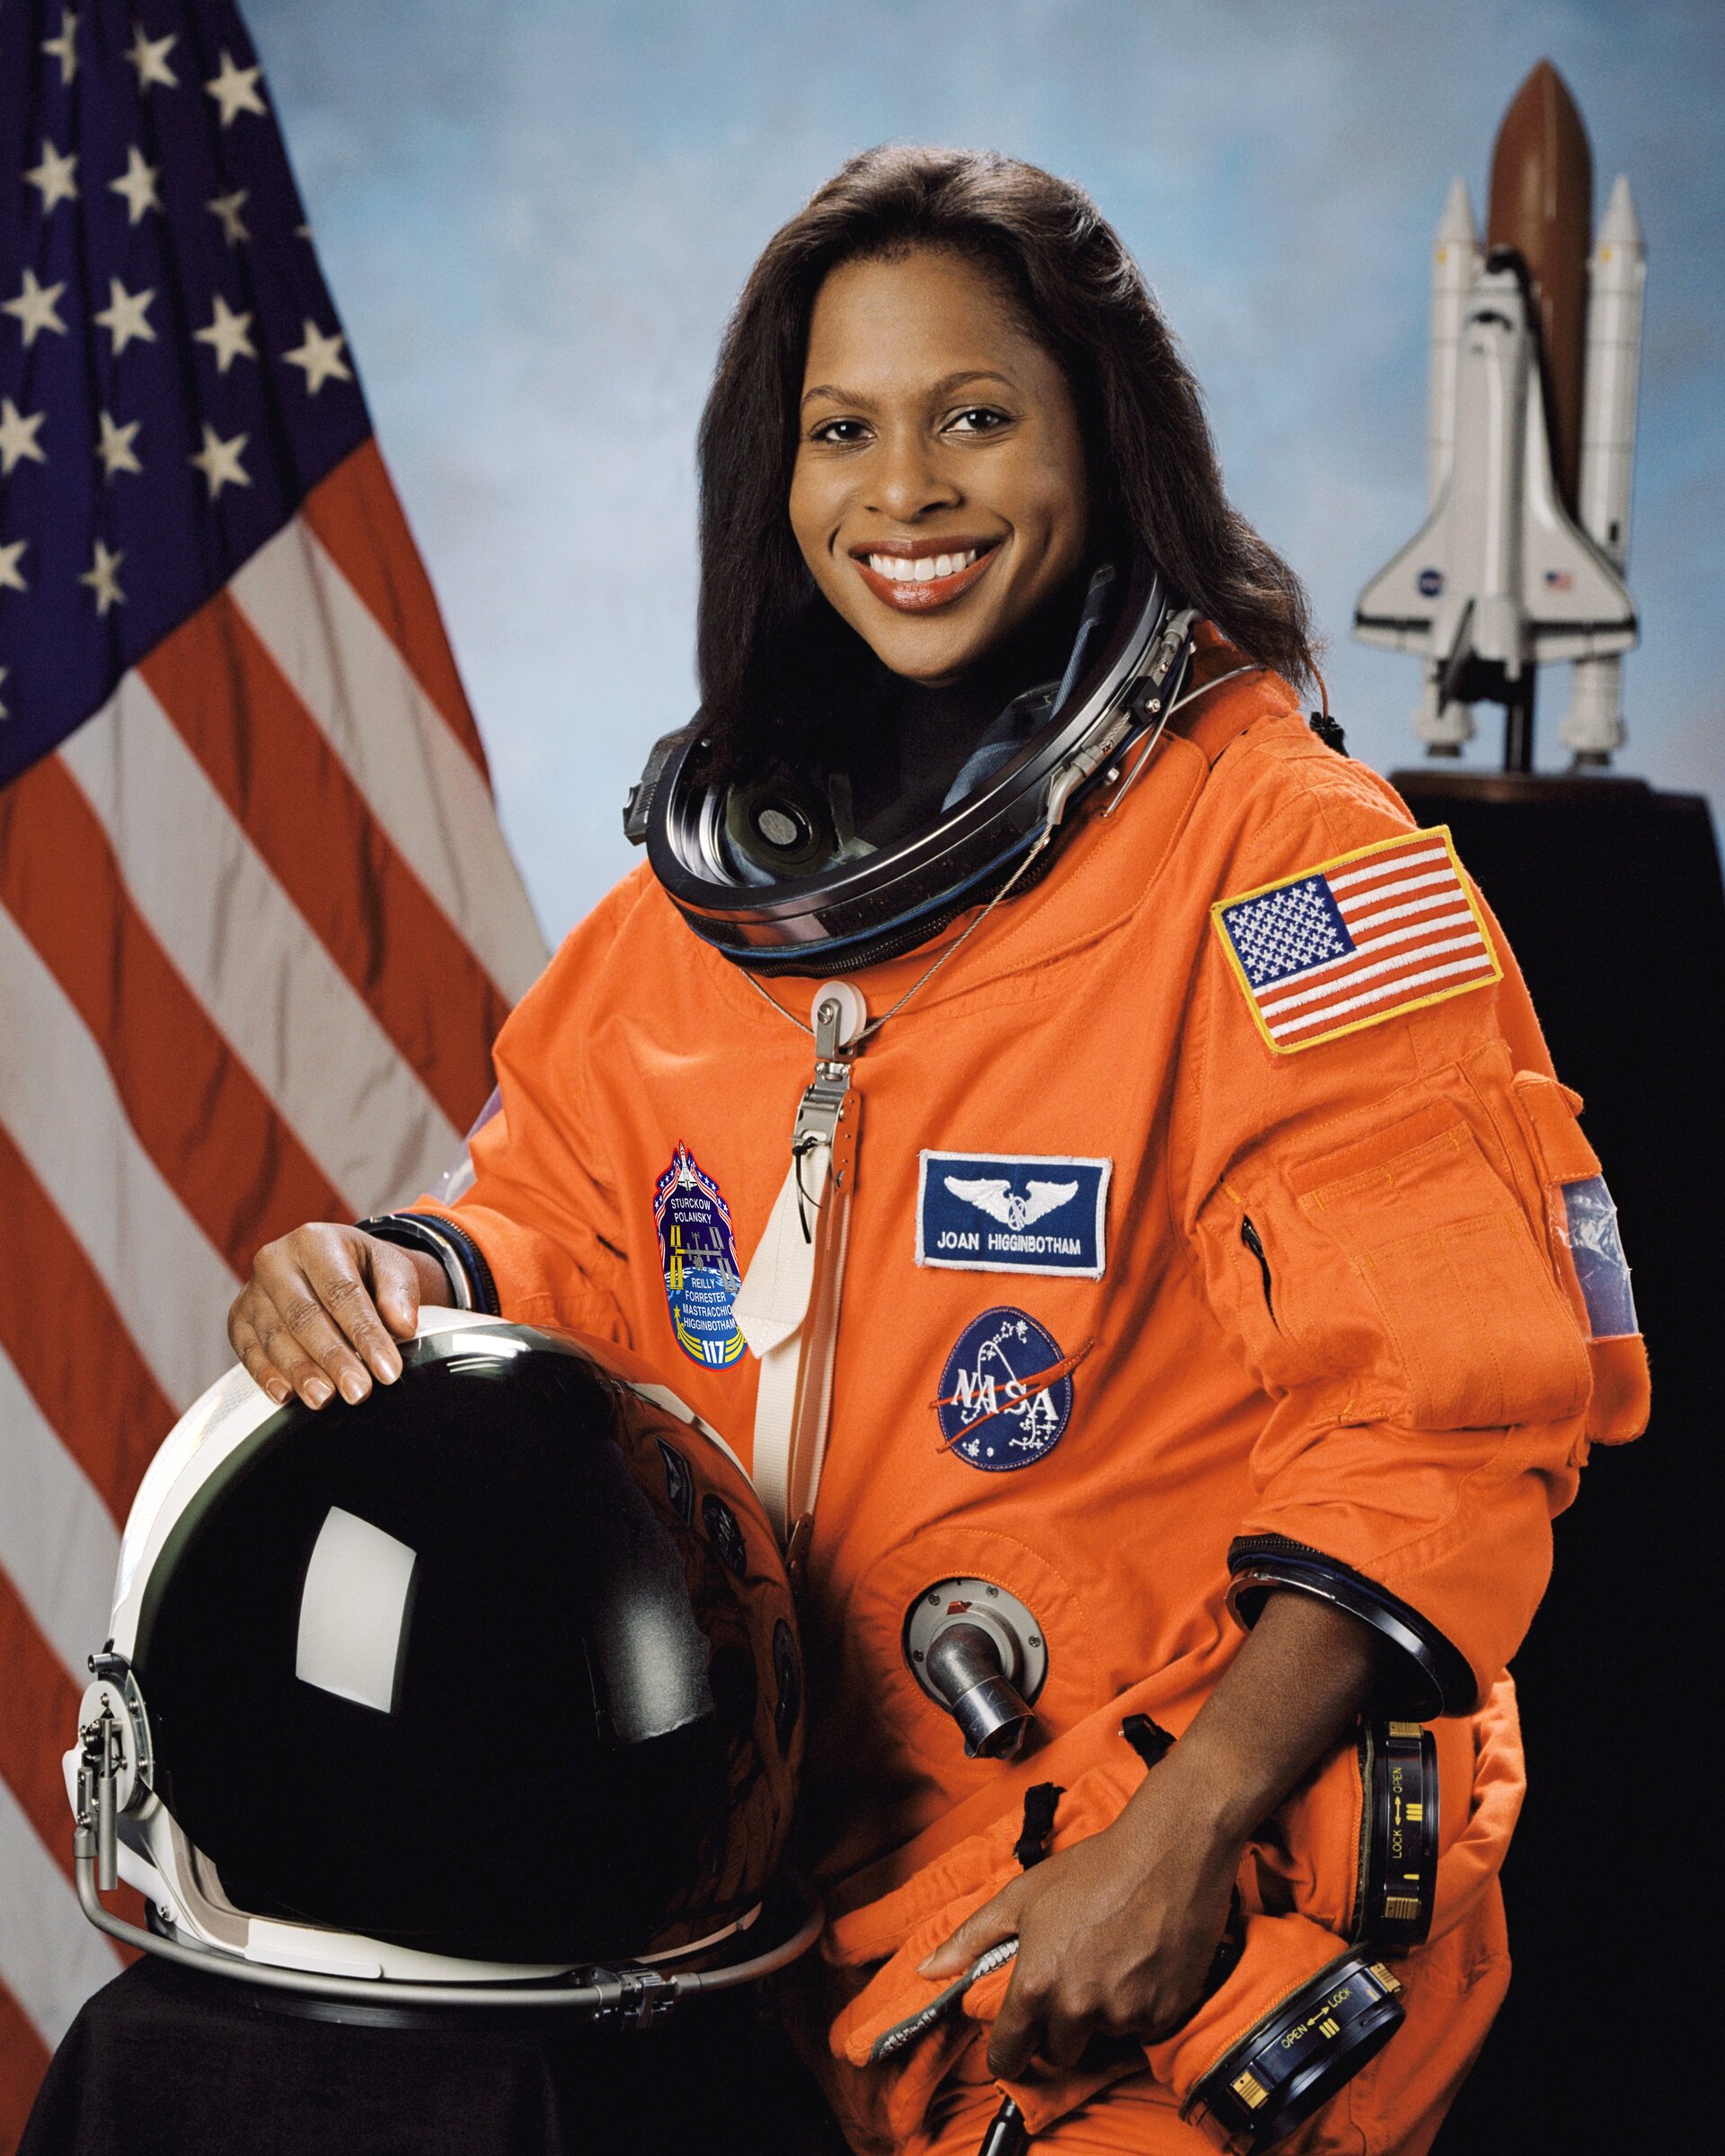 STS-116 Mission Specialist Joan Higginbotham